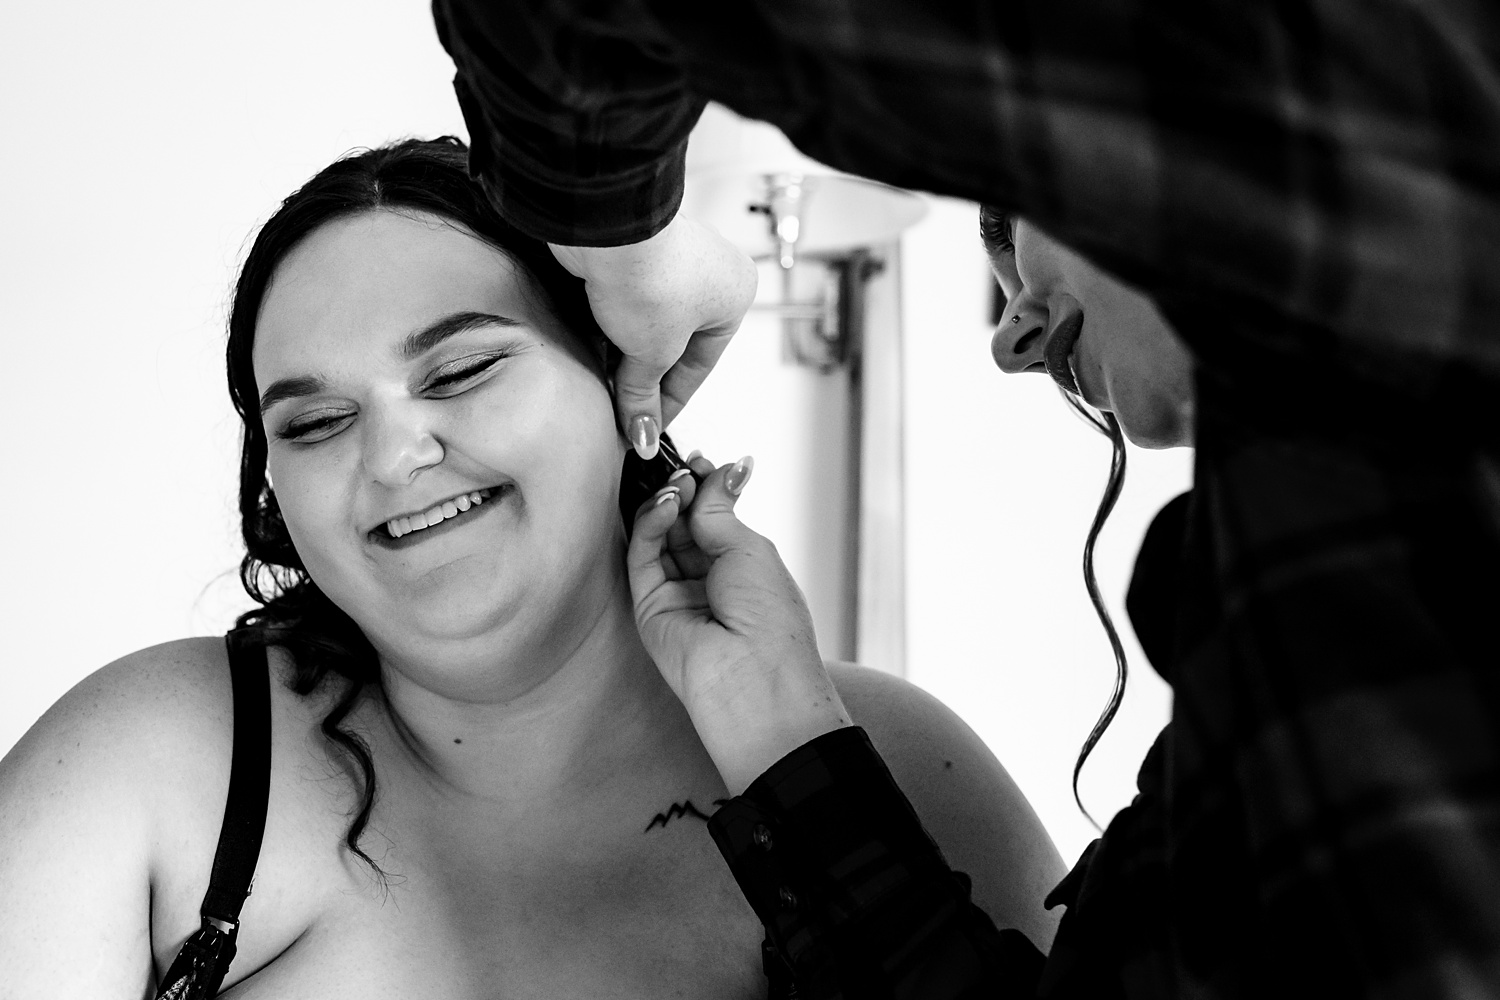 Maid of honor helping the bride with her piercing